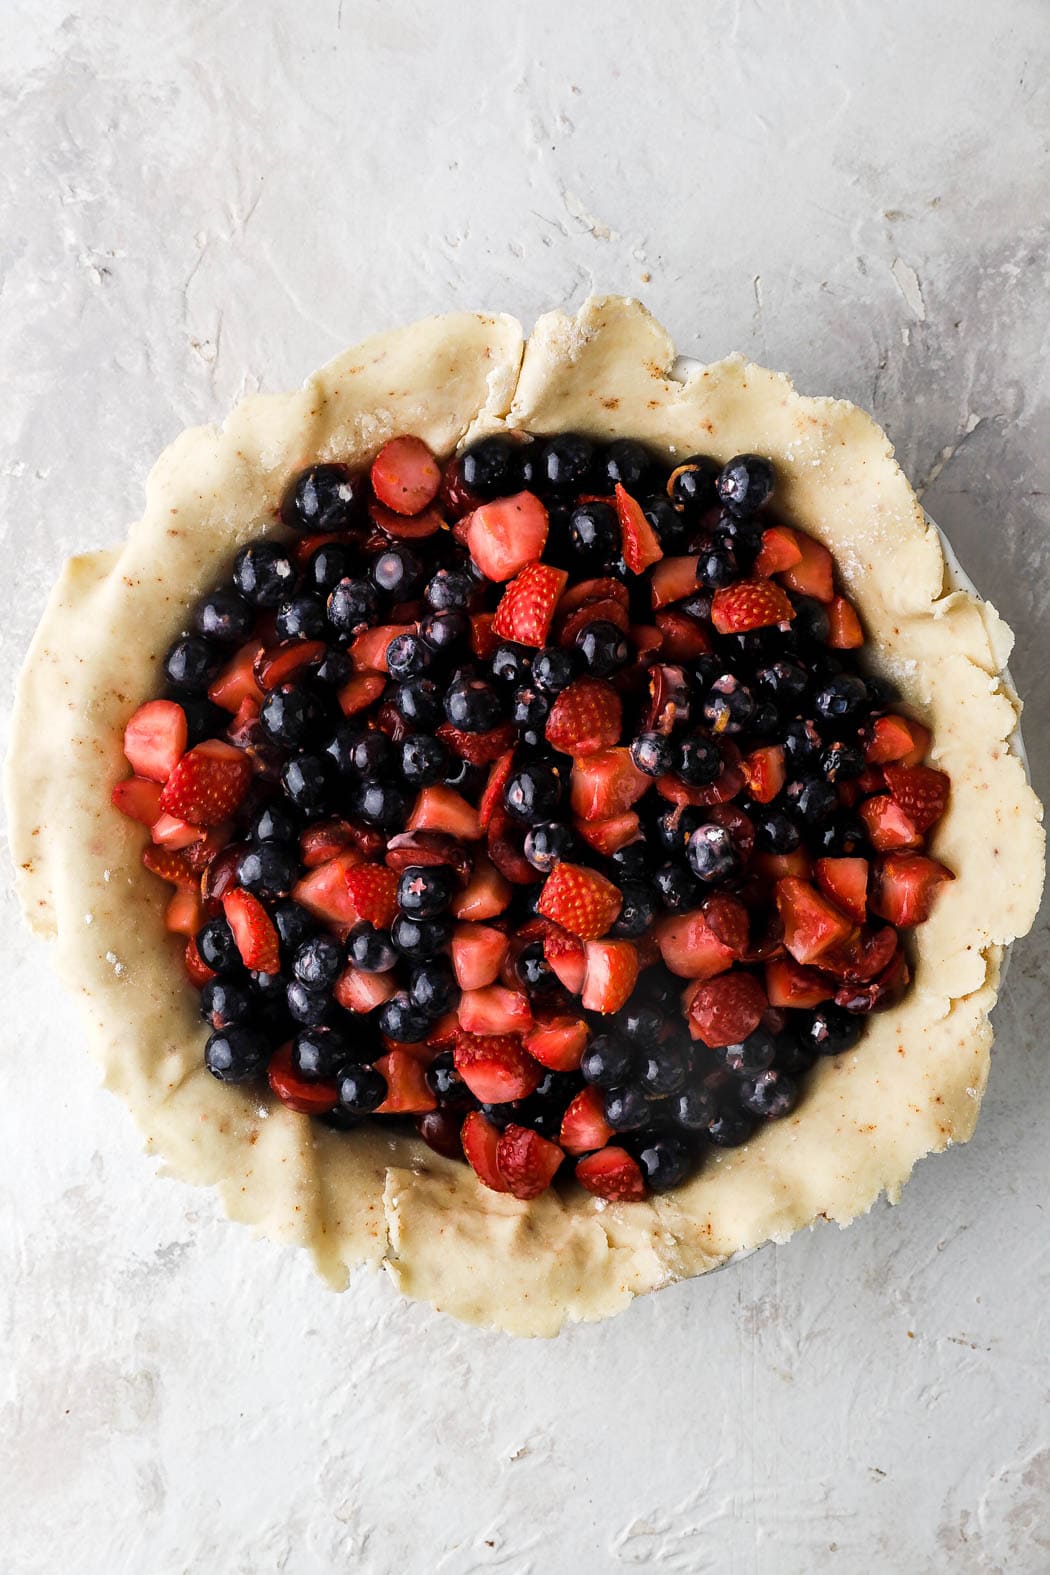 chilled pie crust with strawberry blueberry filling